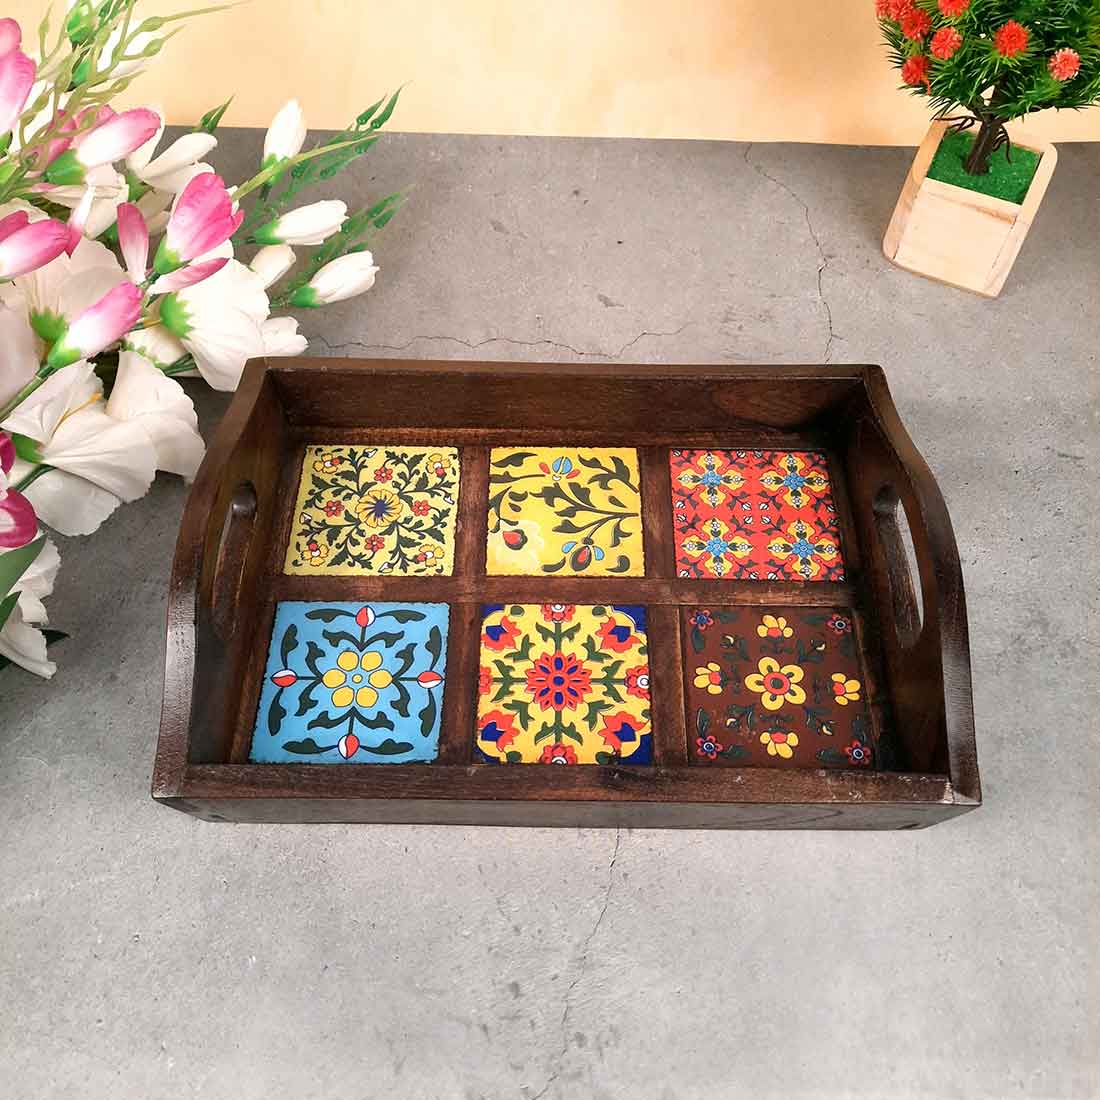 Wooden Serving Tray | Tray with In-Built Ceramic Coasters - 12 Inch - Apkamart